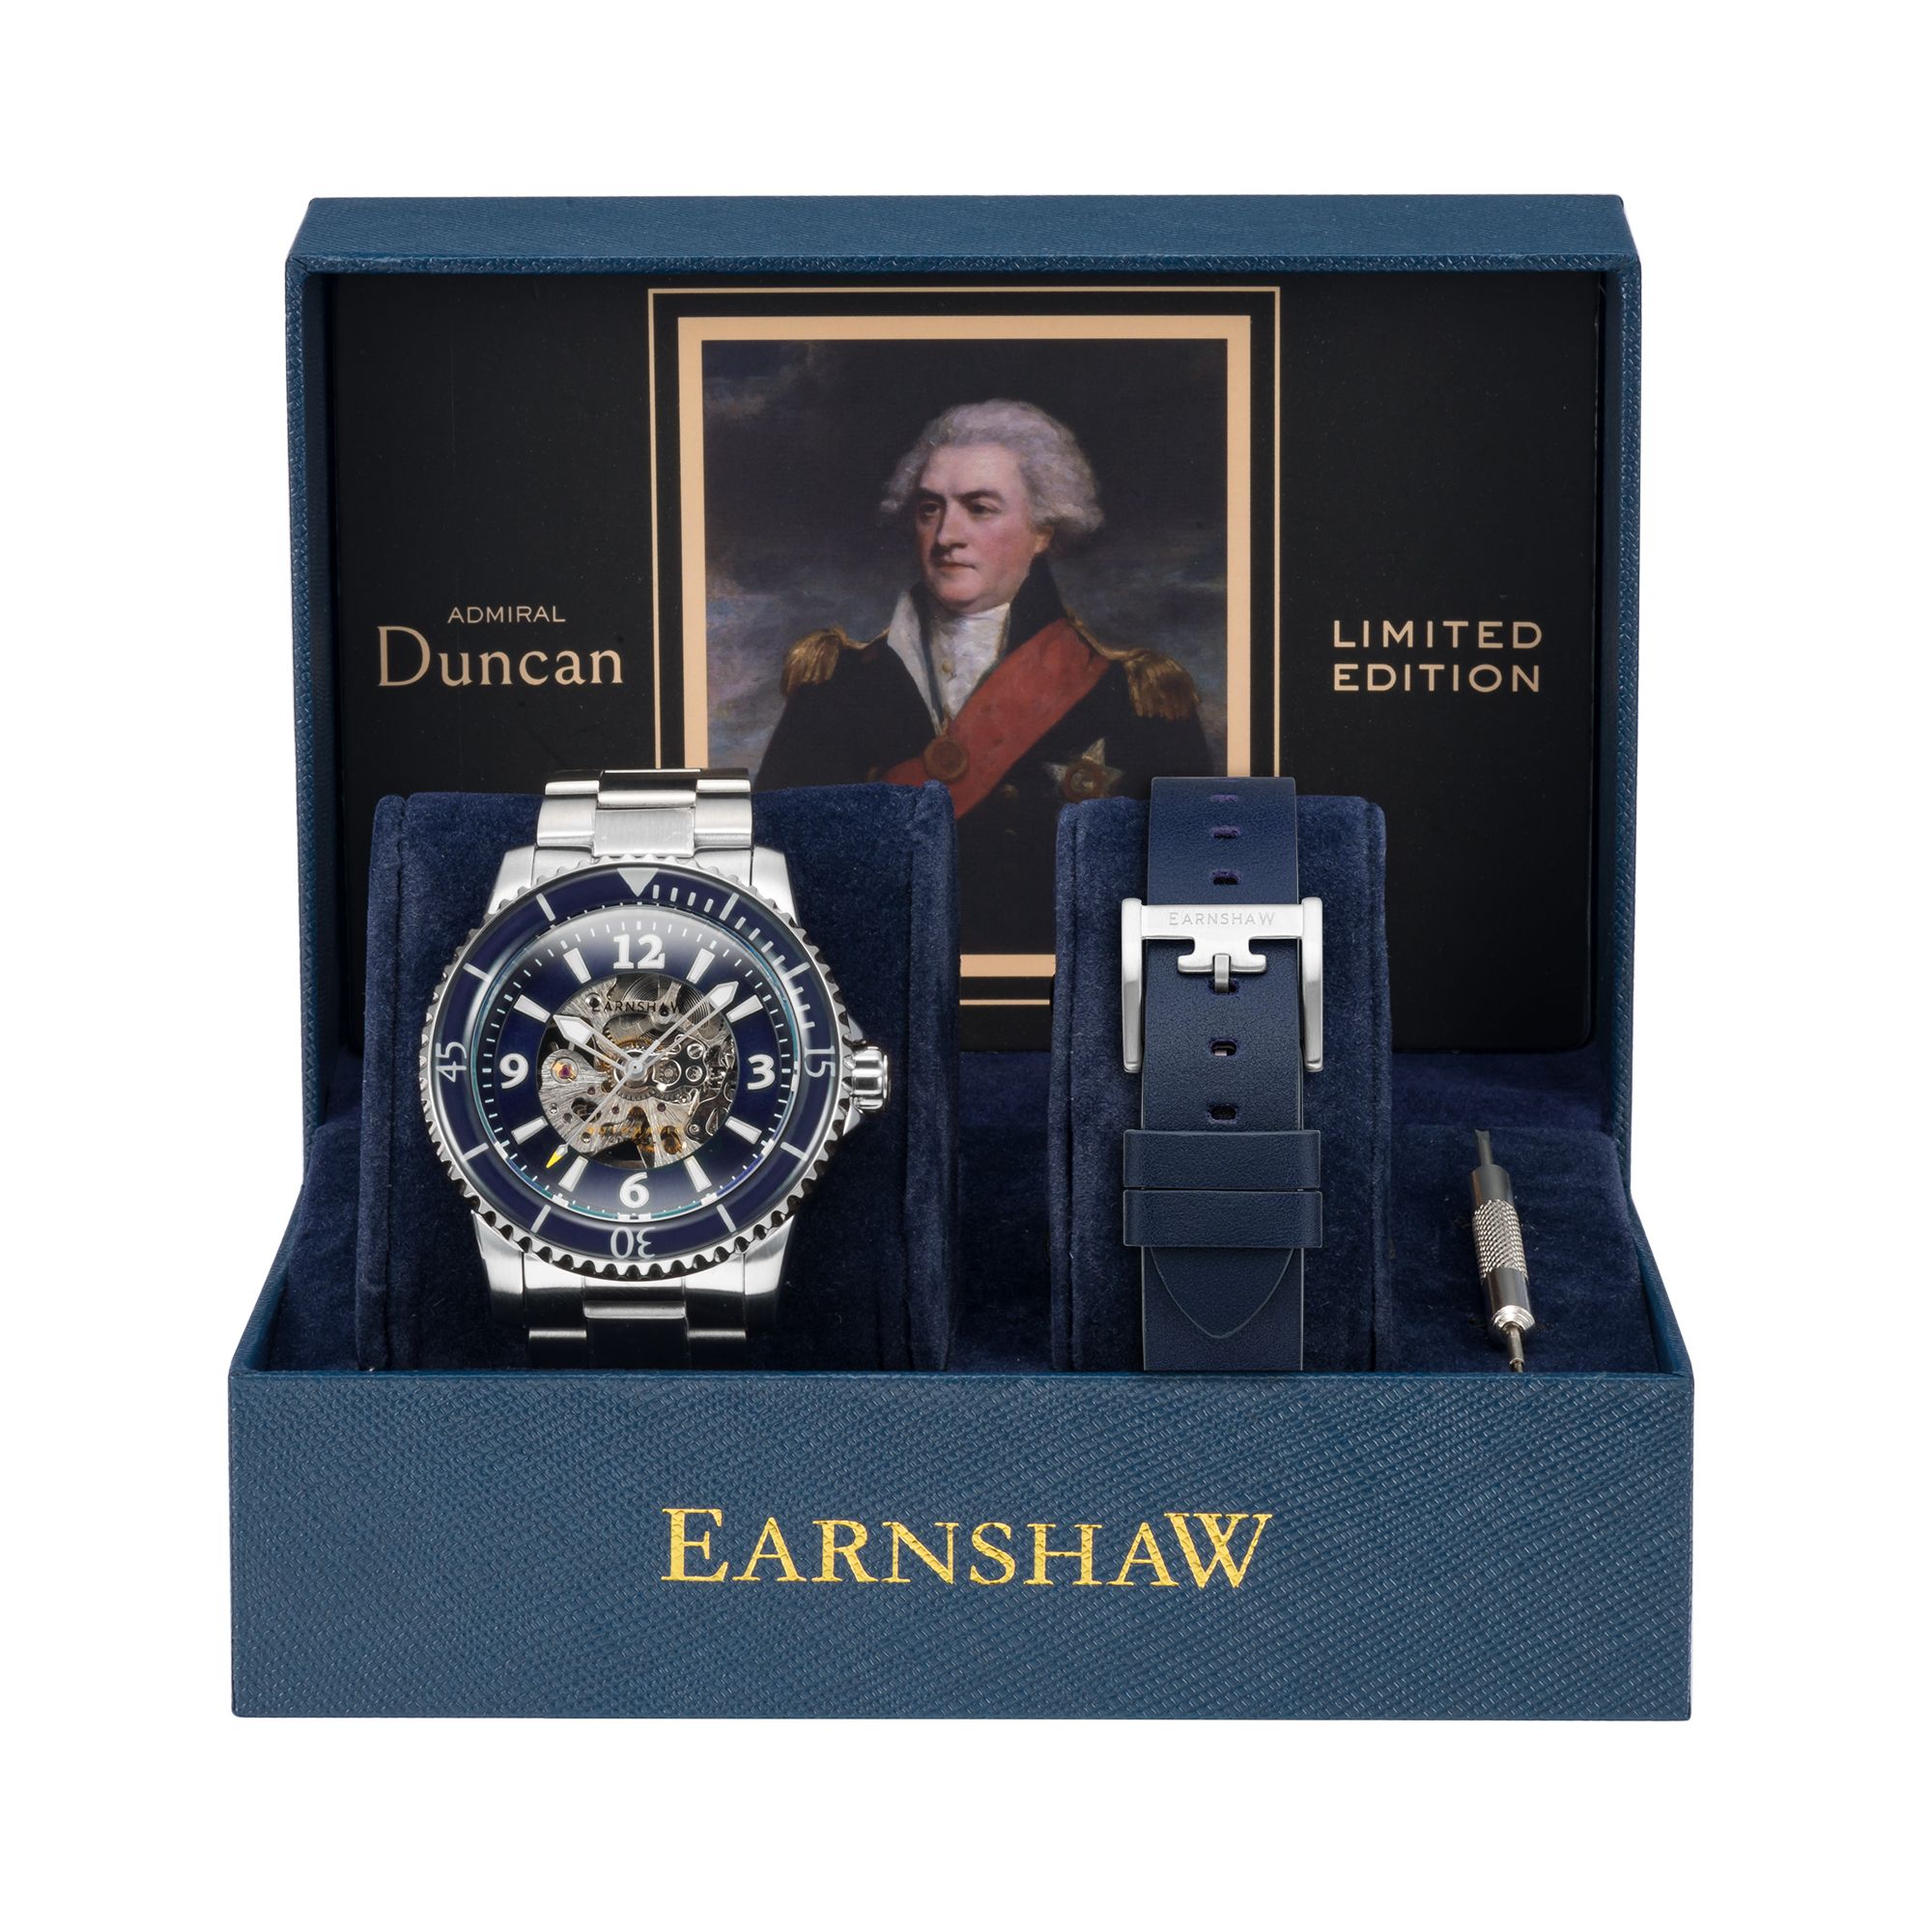 Thomas Earnshaw 43mm Men's Automatic Watch ADMIRAL LIMITED EDITION ES-8129-22 - Click Image to Close